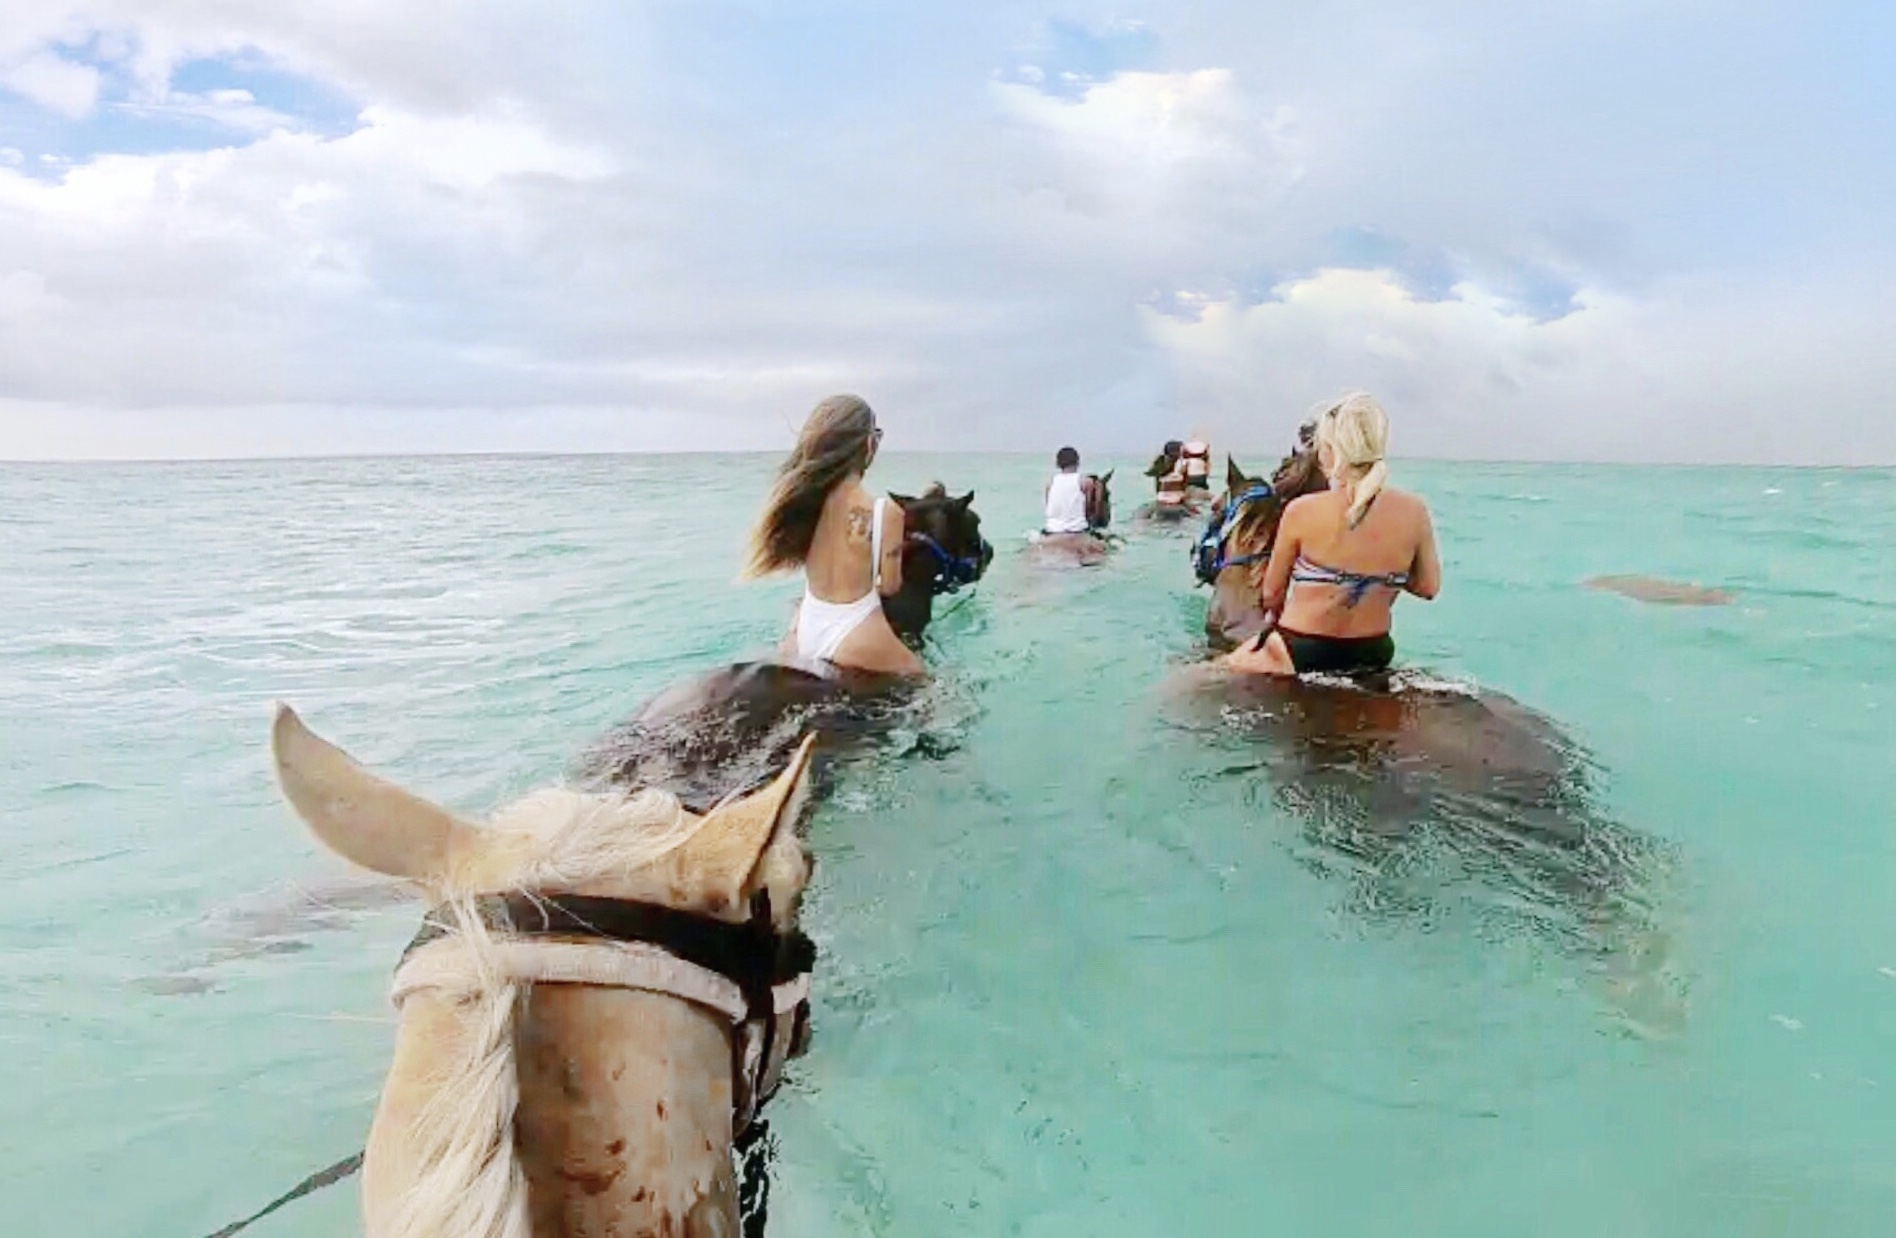 grand cayman excursions, swim with ponies in grand cayman, cayman islands, adventures in grand cayman